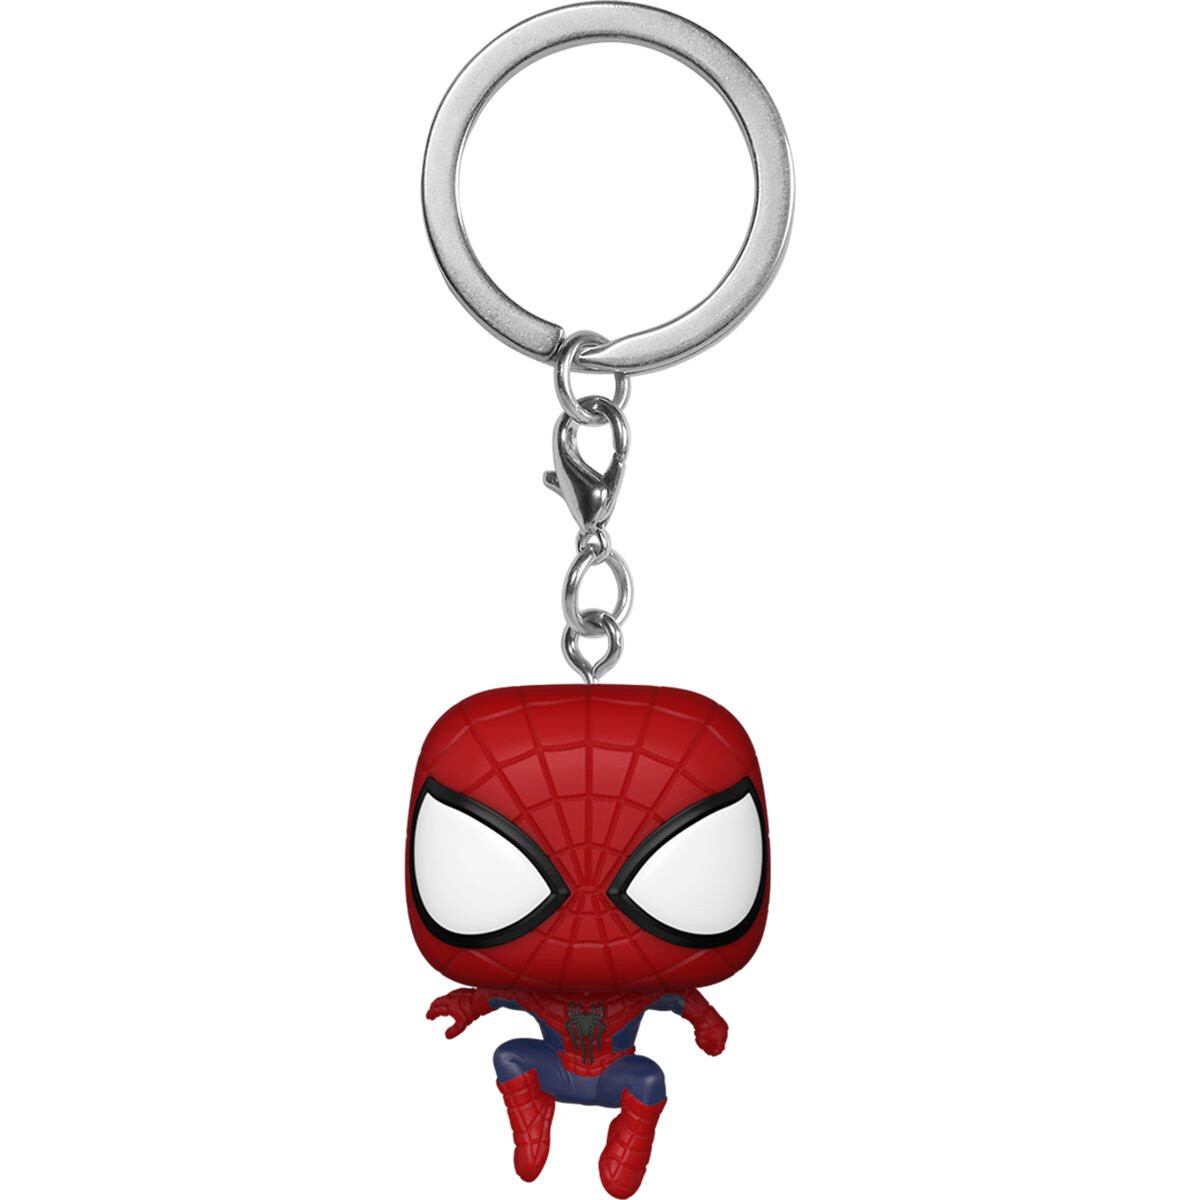 PRE-ORDER Funko Spider-Man: No Way Home The Amazing Spider-Man Leaping Pock Pop! Key Chain